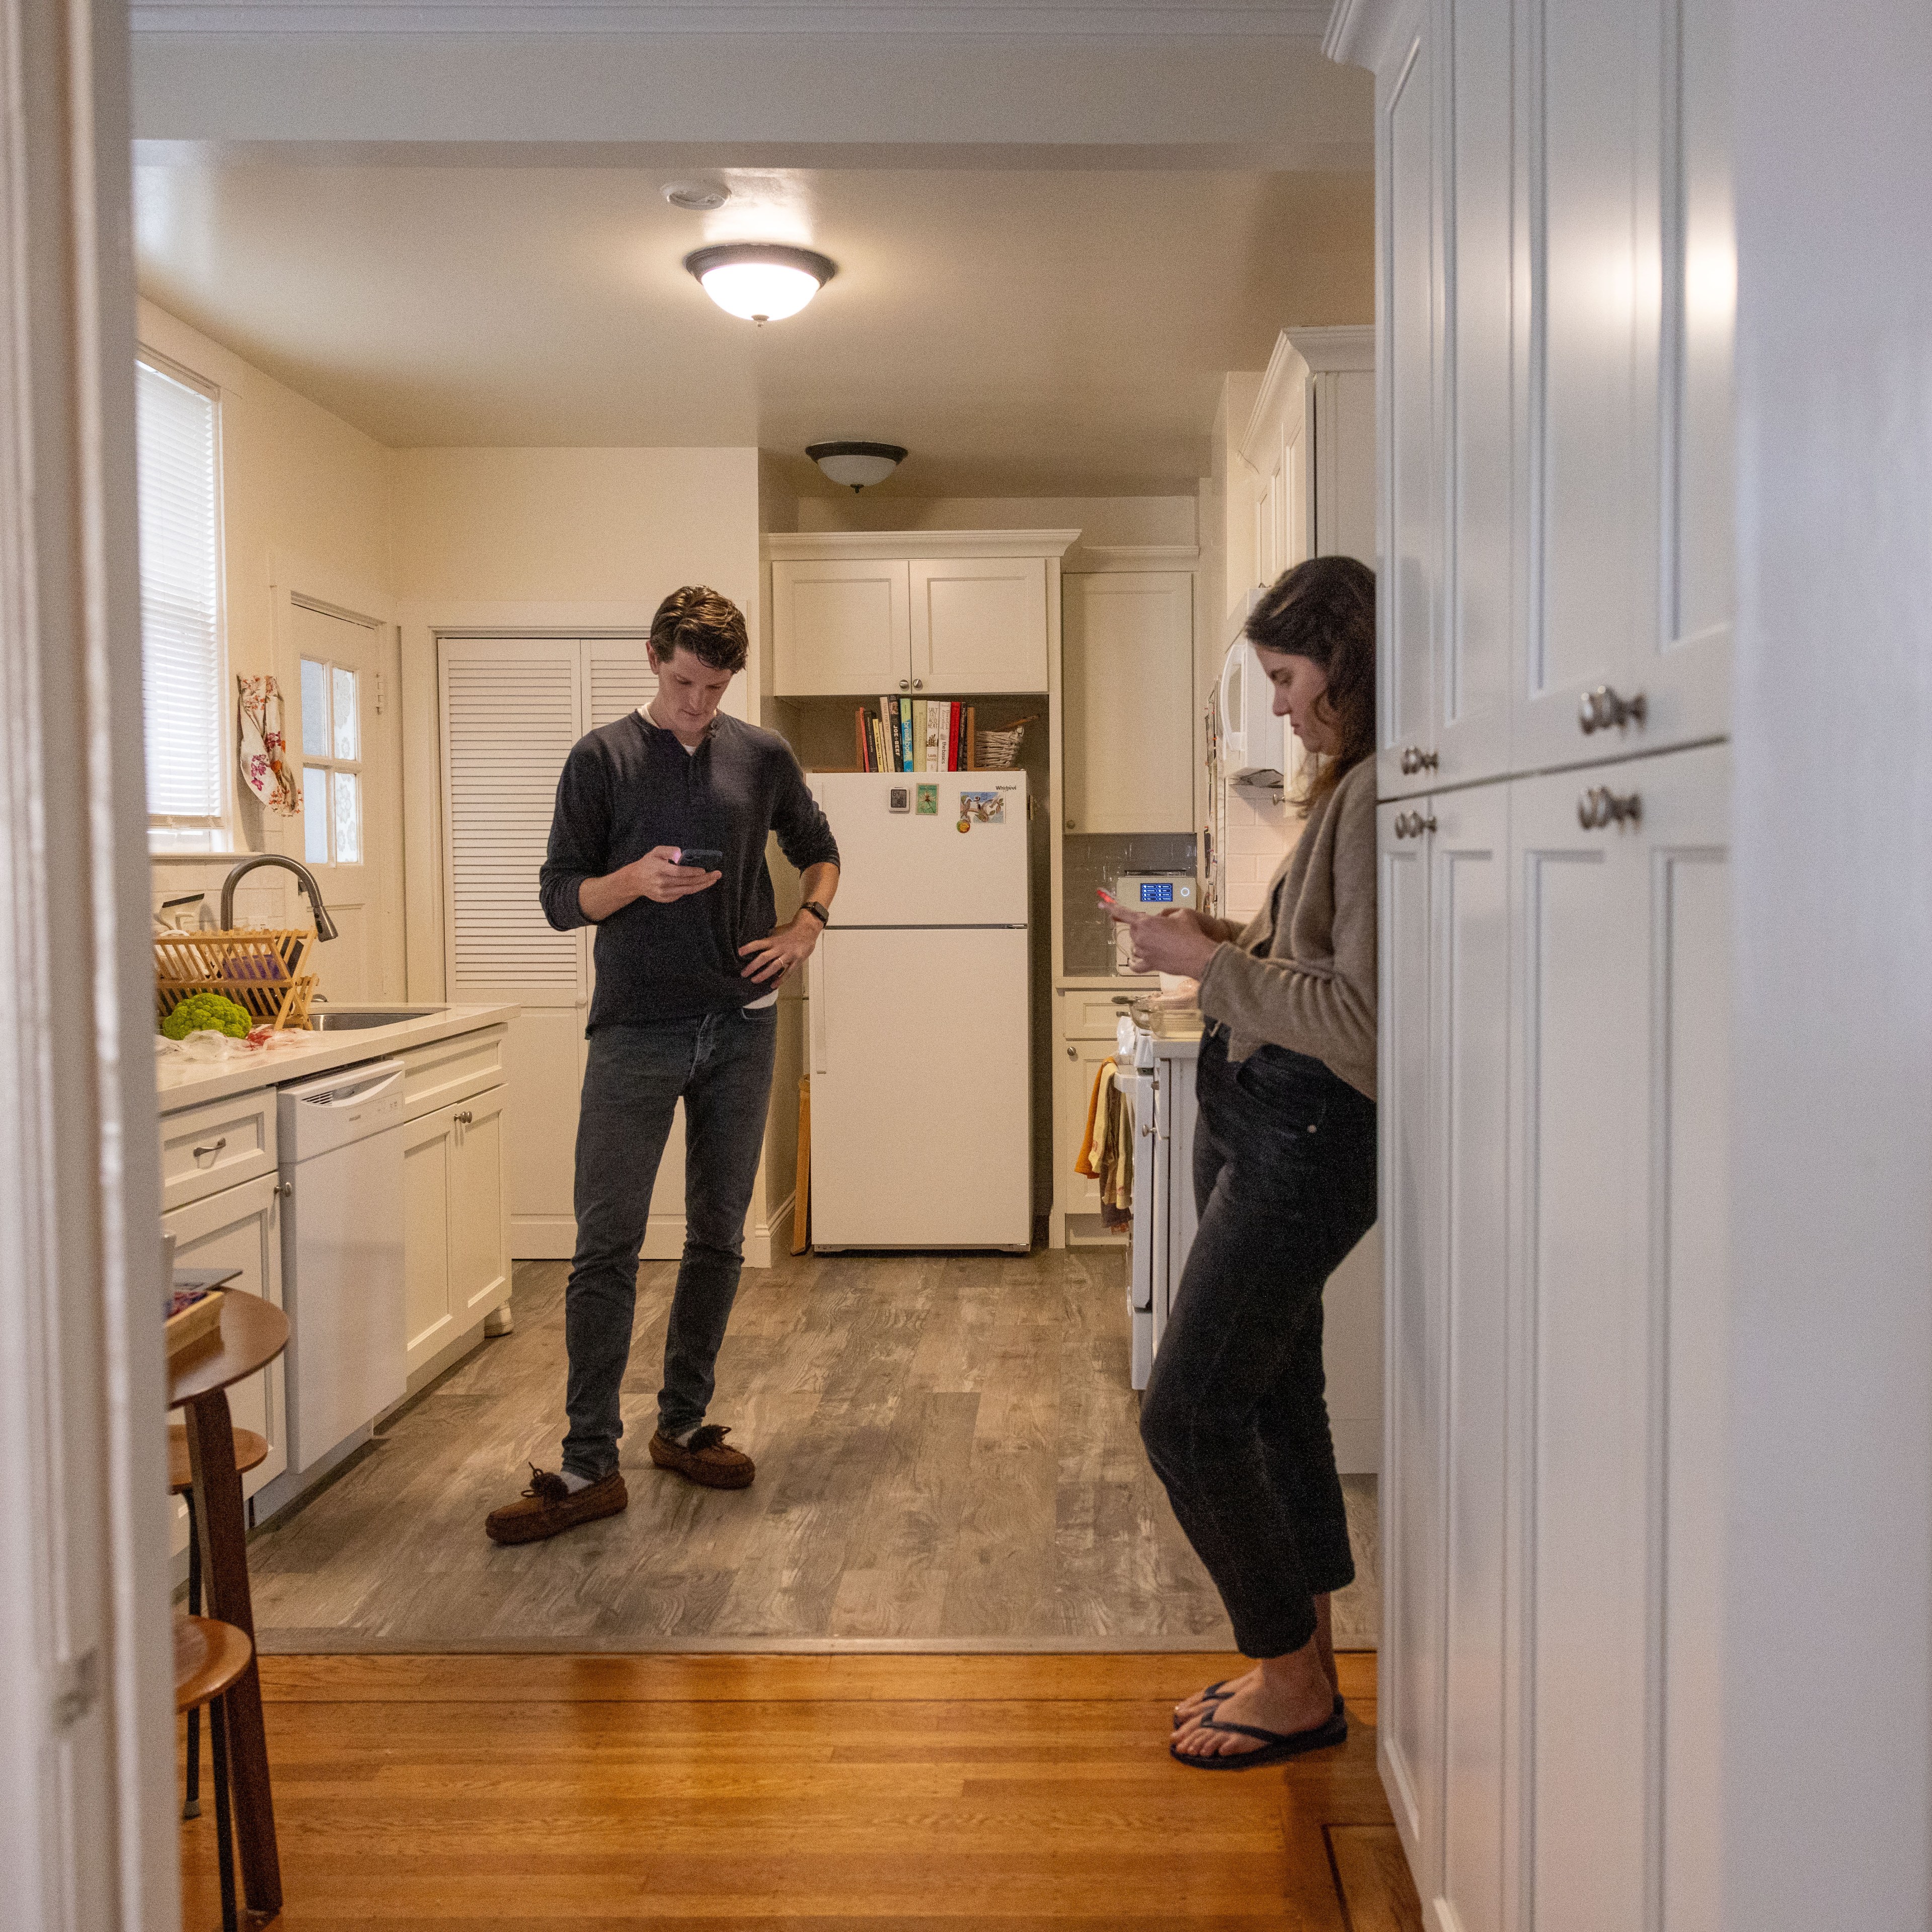 Two people are standing and looking at their phones in a clean kitchen; one leans against a wall, the other stands with one hand on their hip.